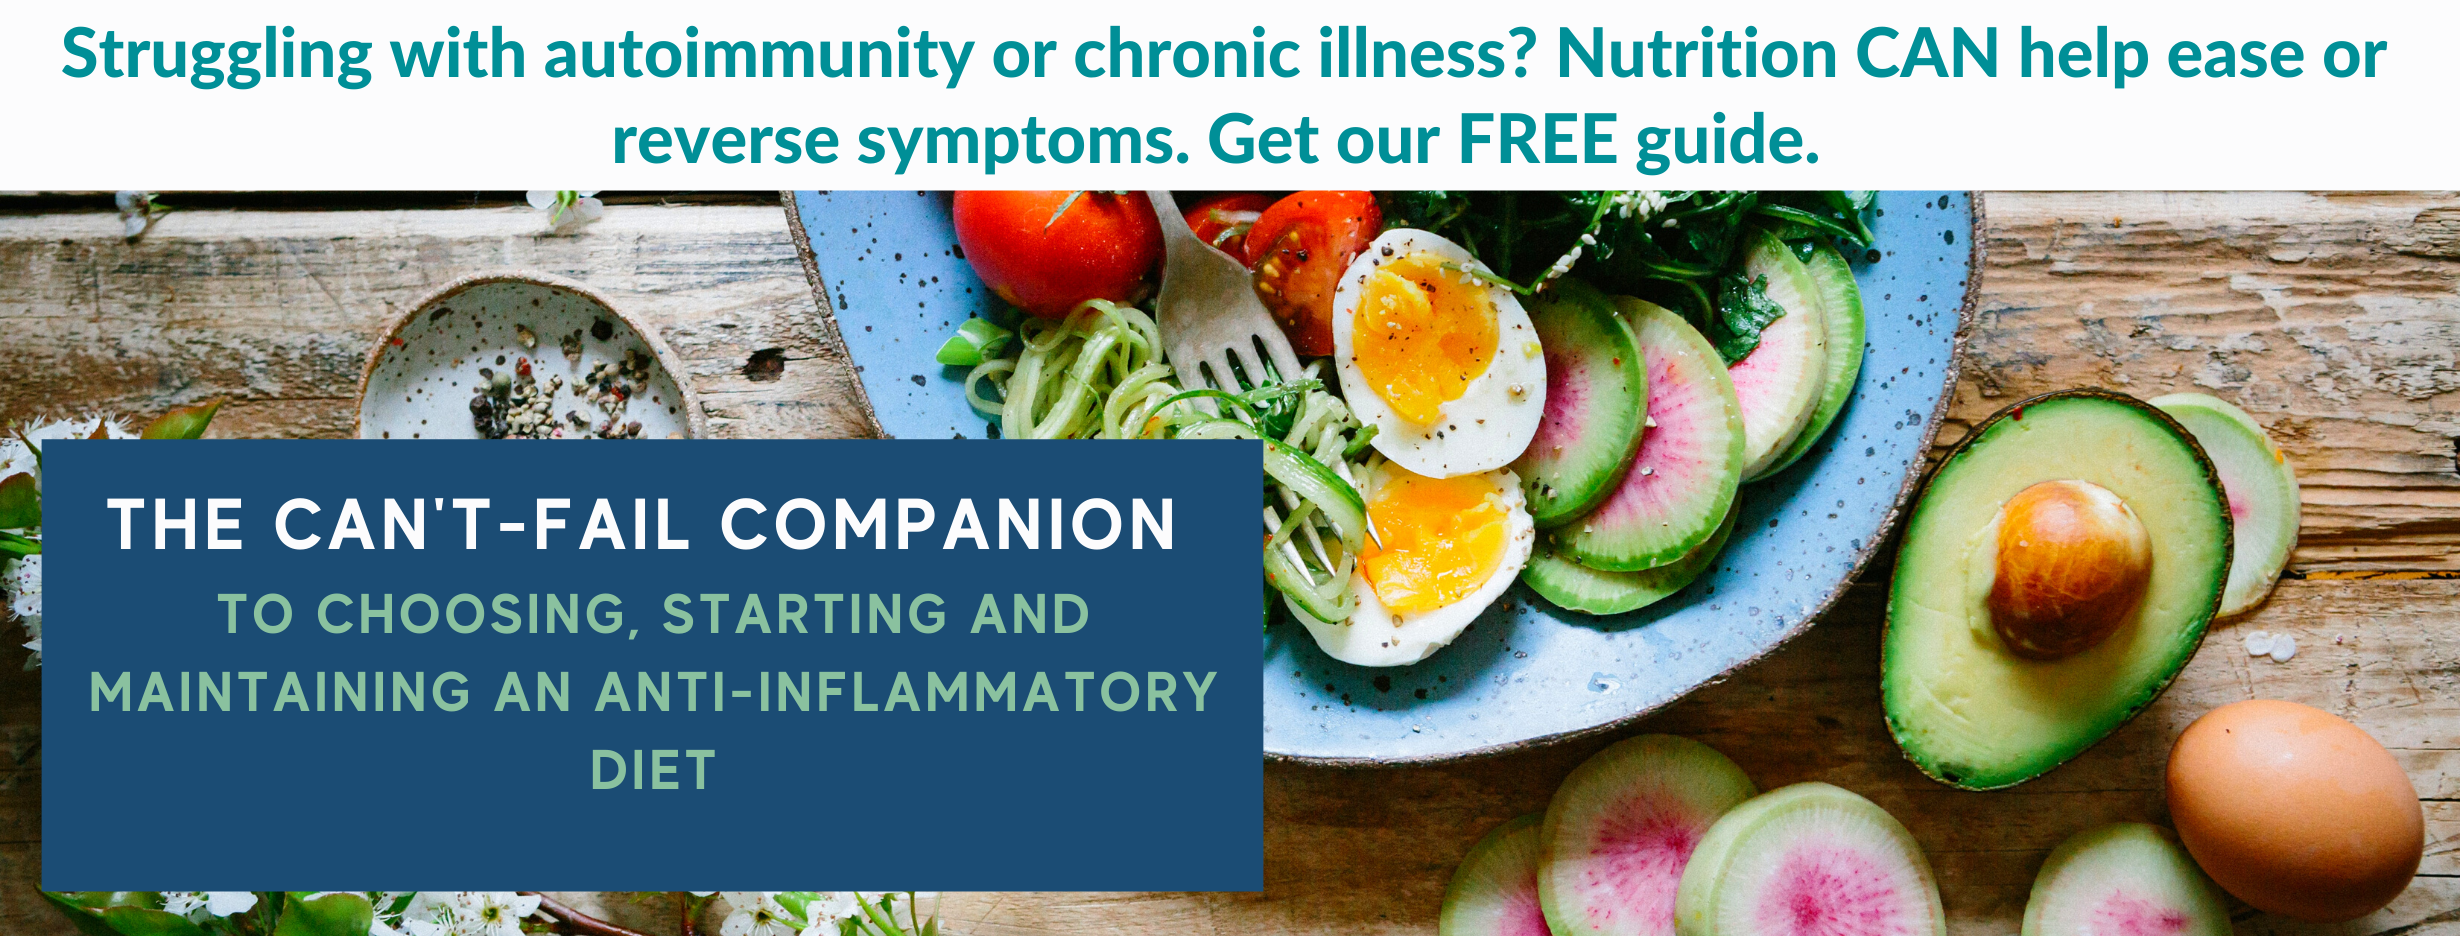 Learn how to choose, start and maintain an anti-inflammatory diet to heal autoimmunity or chronic illness